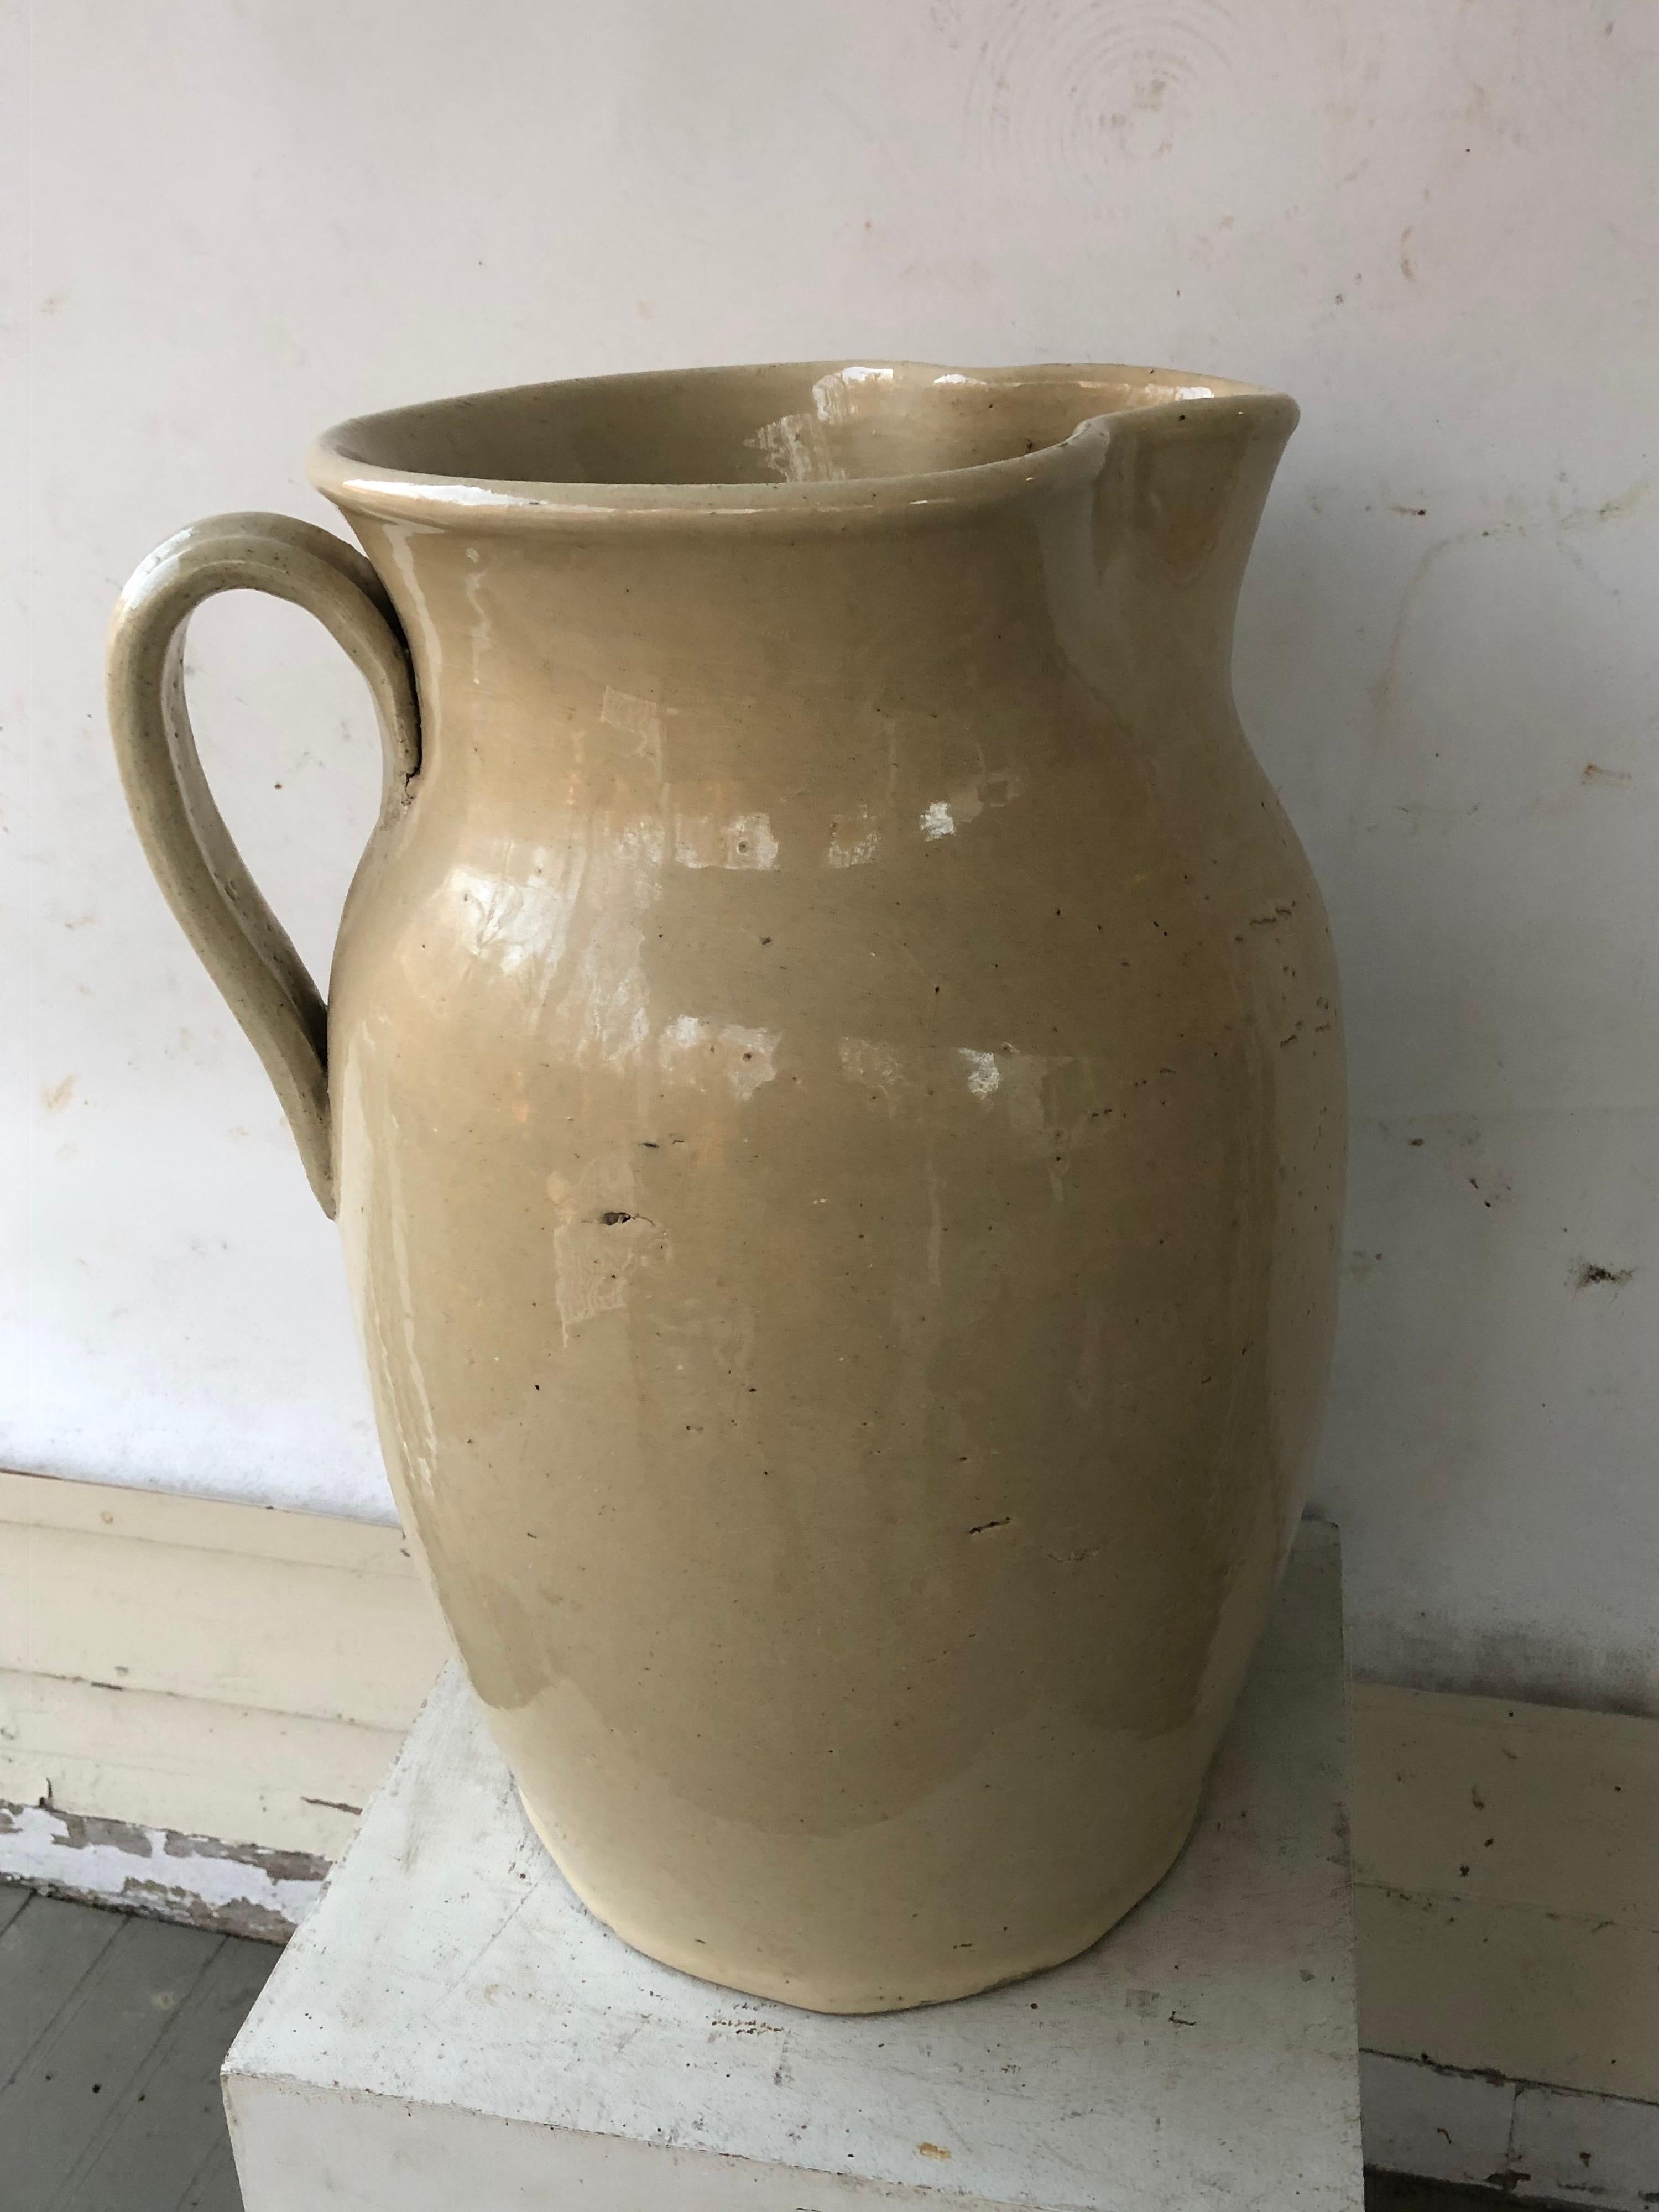 Amazingly large cream glazed English pottery pitcher. Great for flowers arrangements or as an umbrella stand.